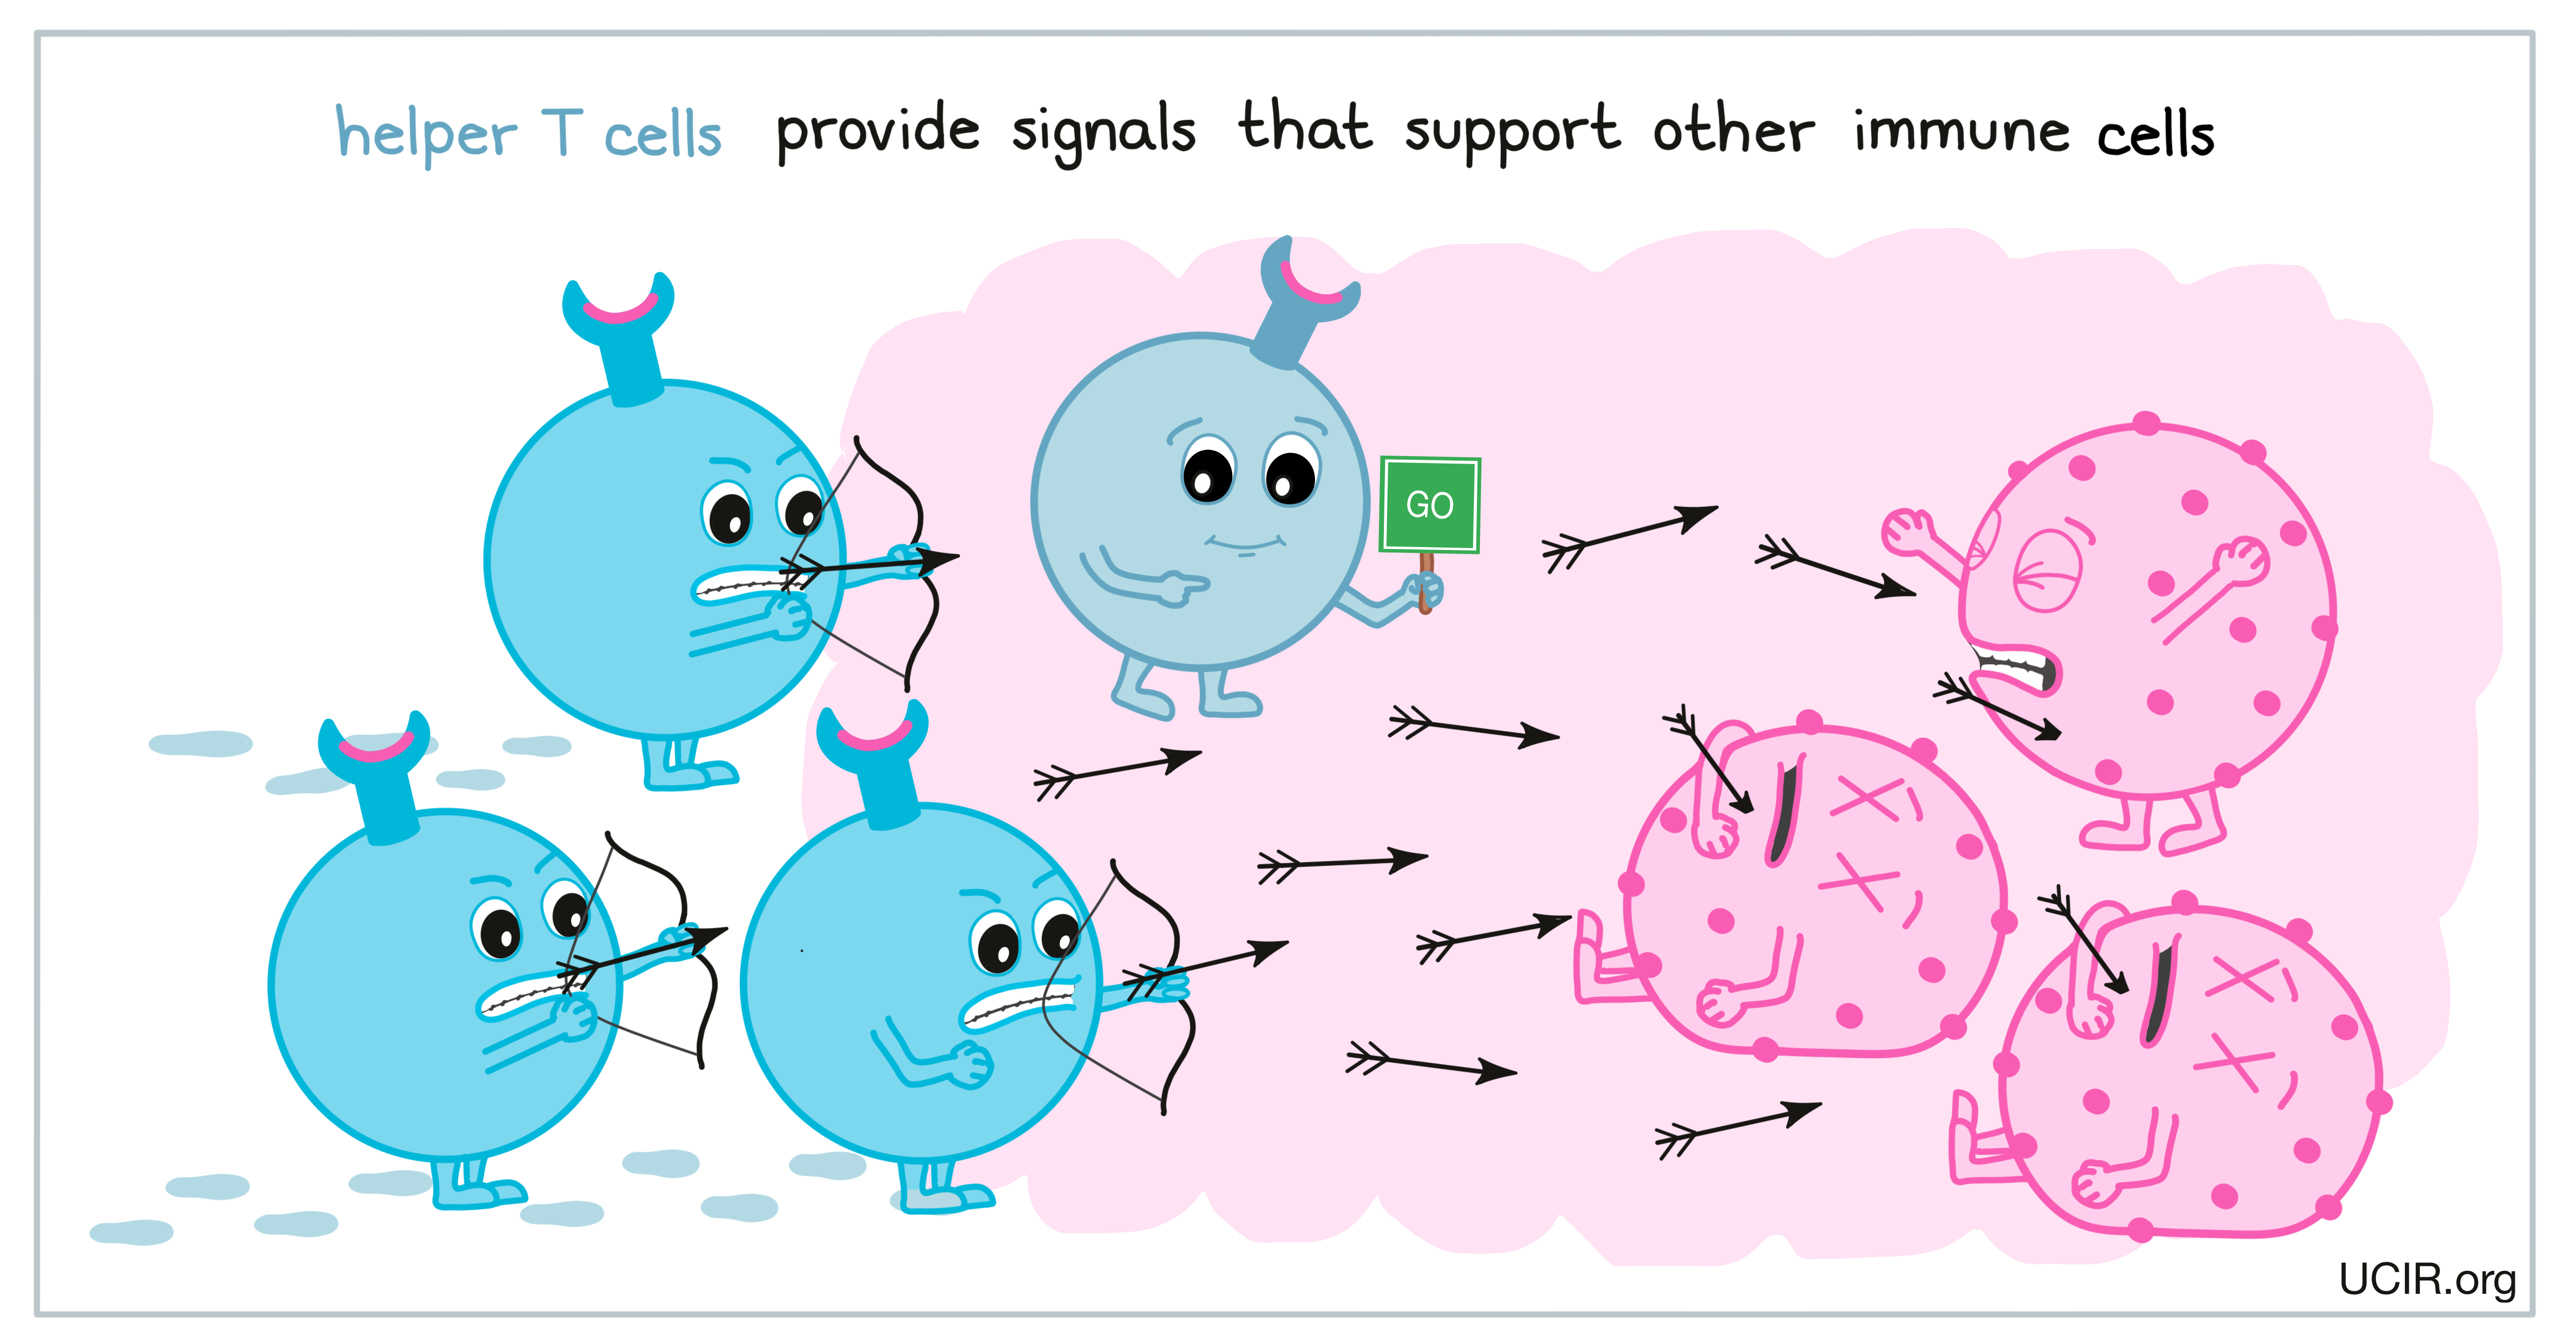 Helper T cells provide signals that support other immune cells